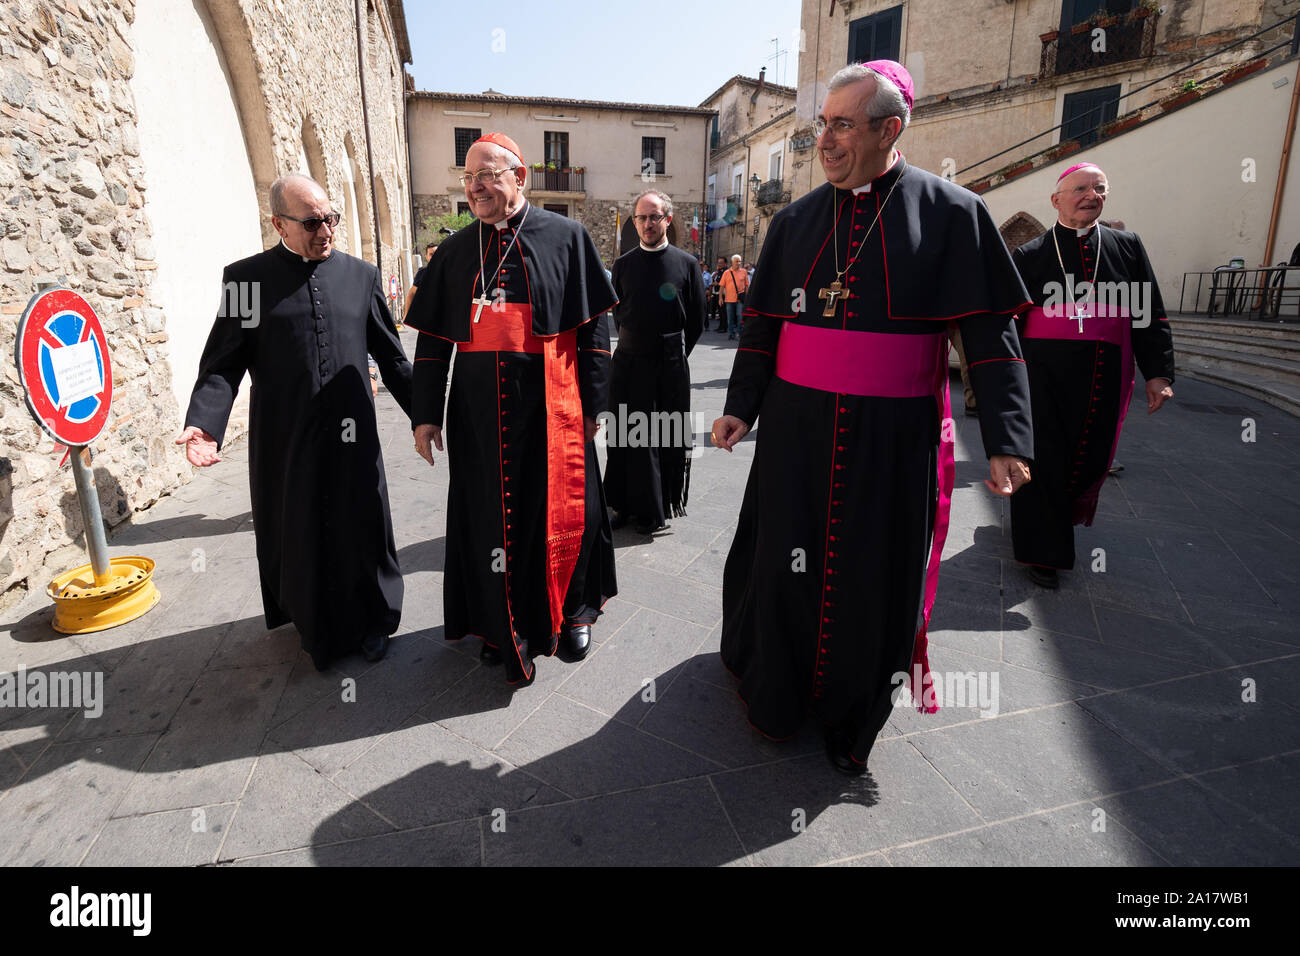 Corigliano Rossano, Cardinals and Bishops during the visit of Bartholomew I, Patriarch of Constantinople, considered the Pope of Greek Orthodox Catholics. 19/09/2019, Corigliano Rossano, Italy Stock Photo